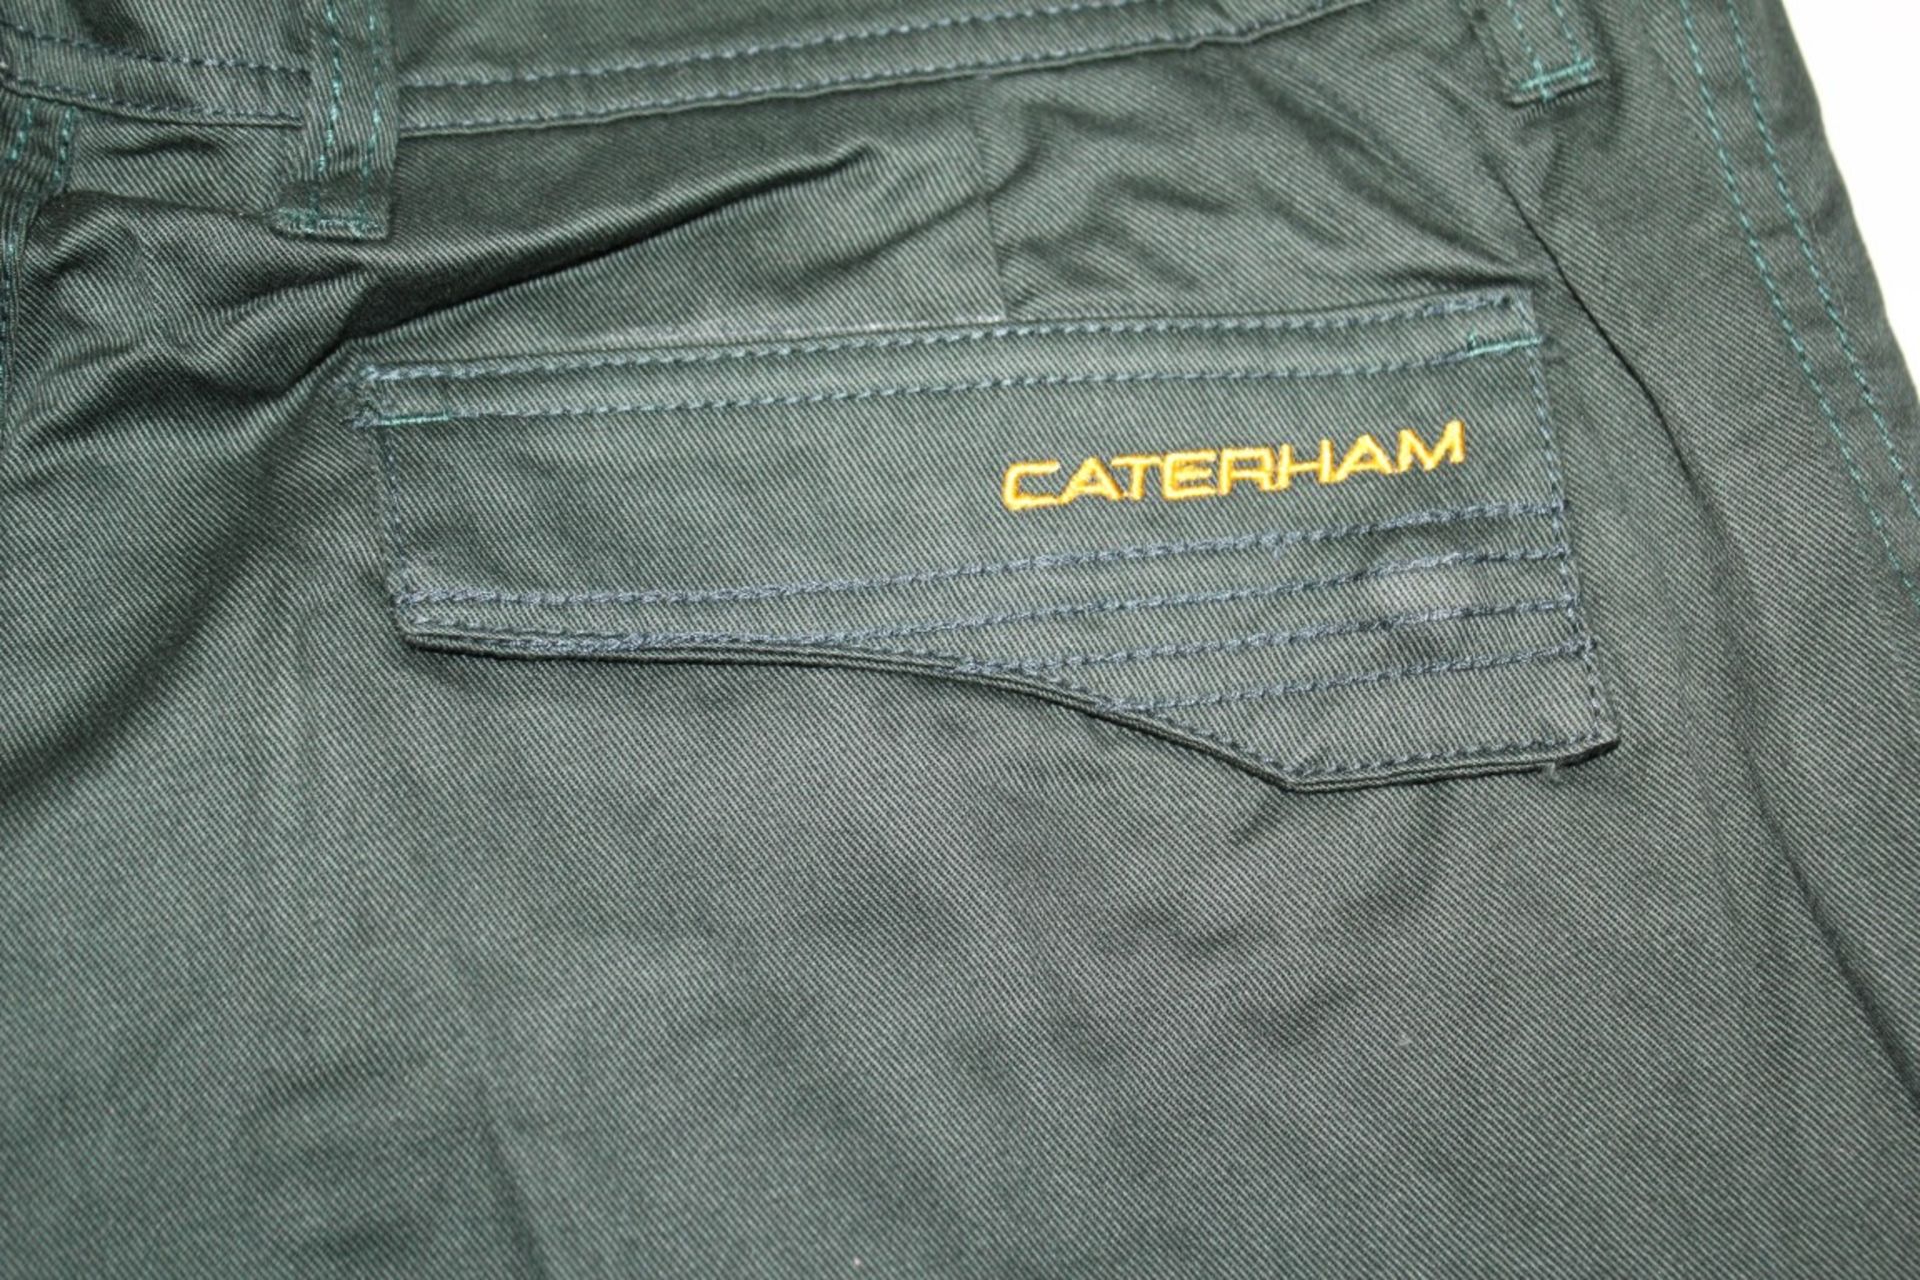 19 x Pairs Of CATERHAM F1 Team Wear Shorts - Sizes Includes: 28, 30 & 34 Waist (UK) - Ideal Casual / - Image 6 of 6